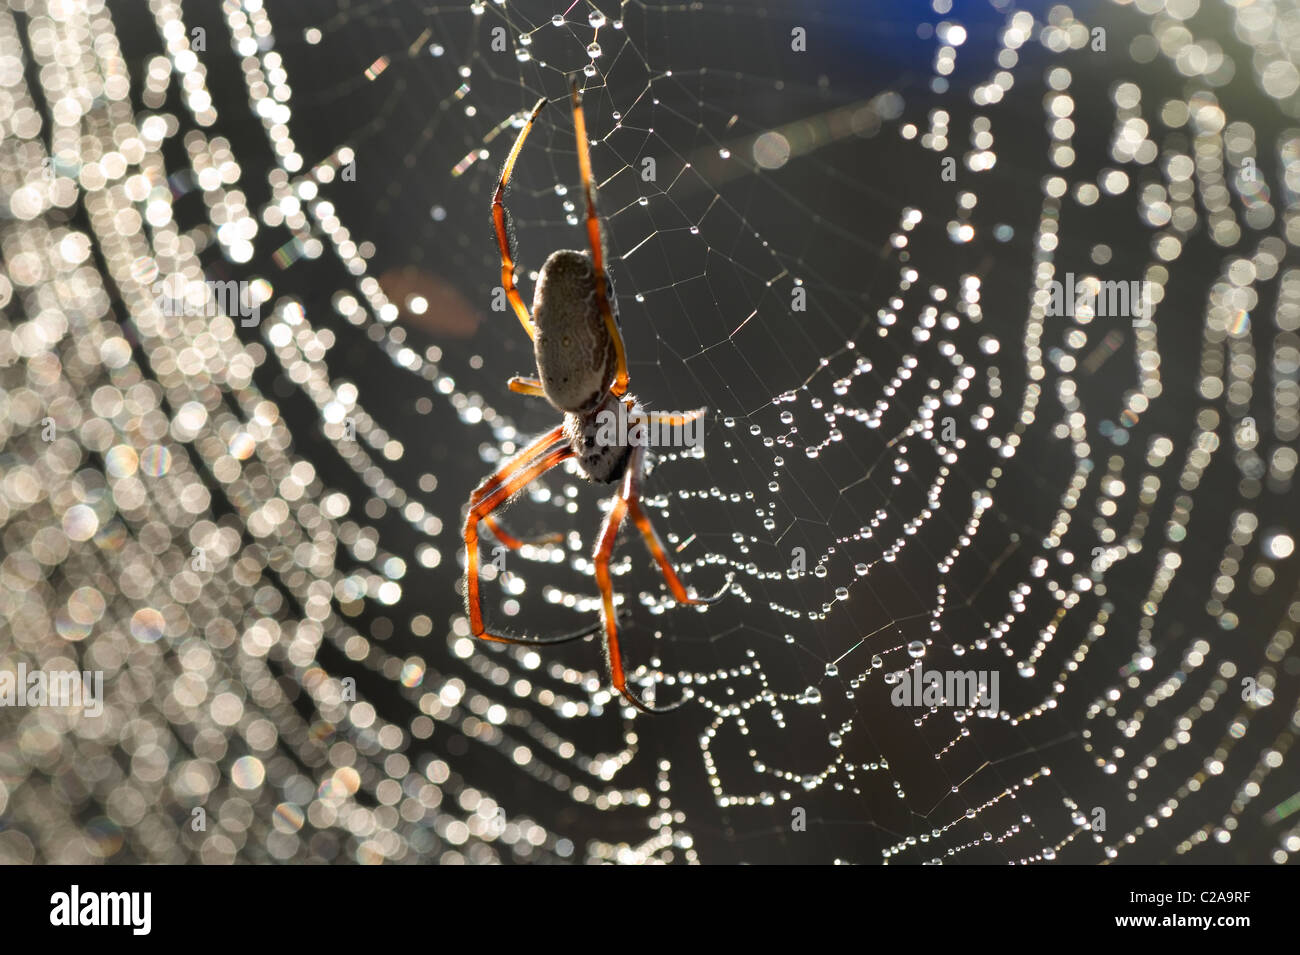 cobwebs with water drops Golden Orb Spider Stock Photo